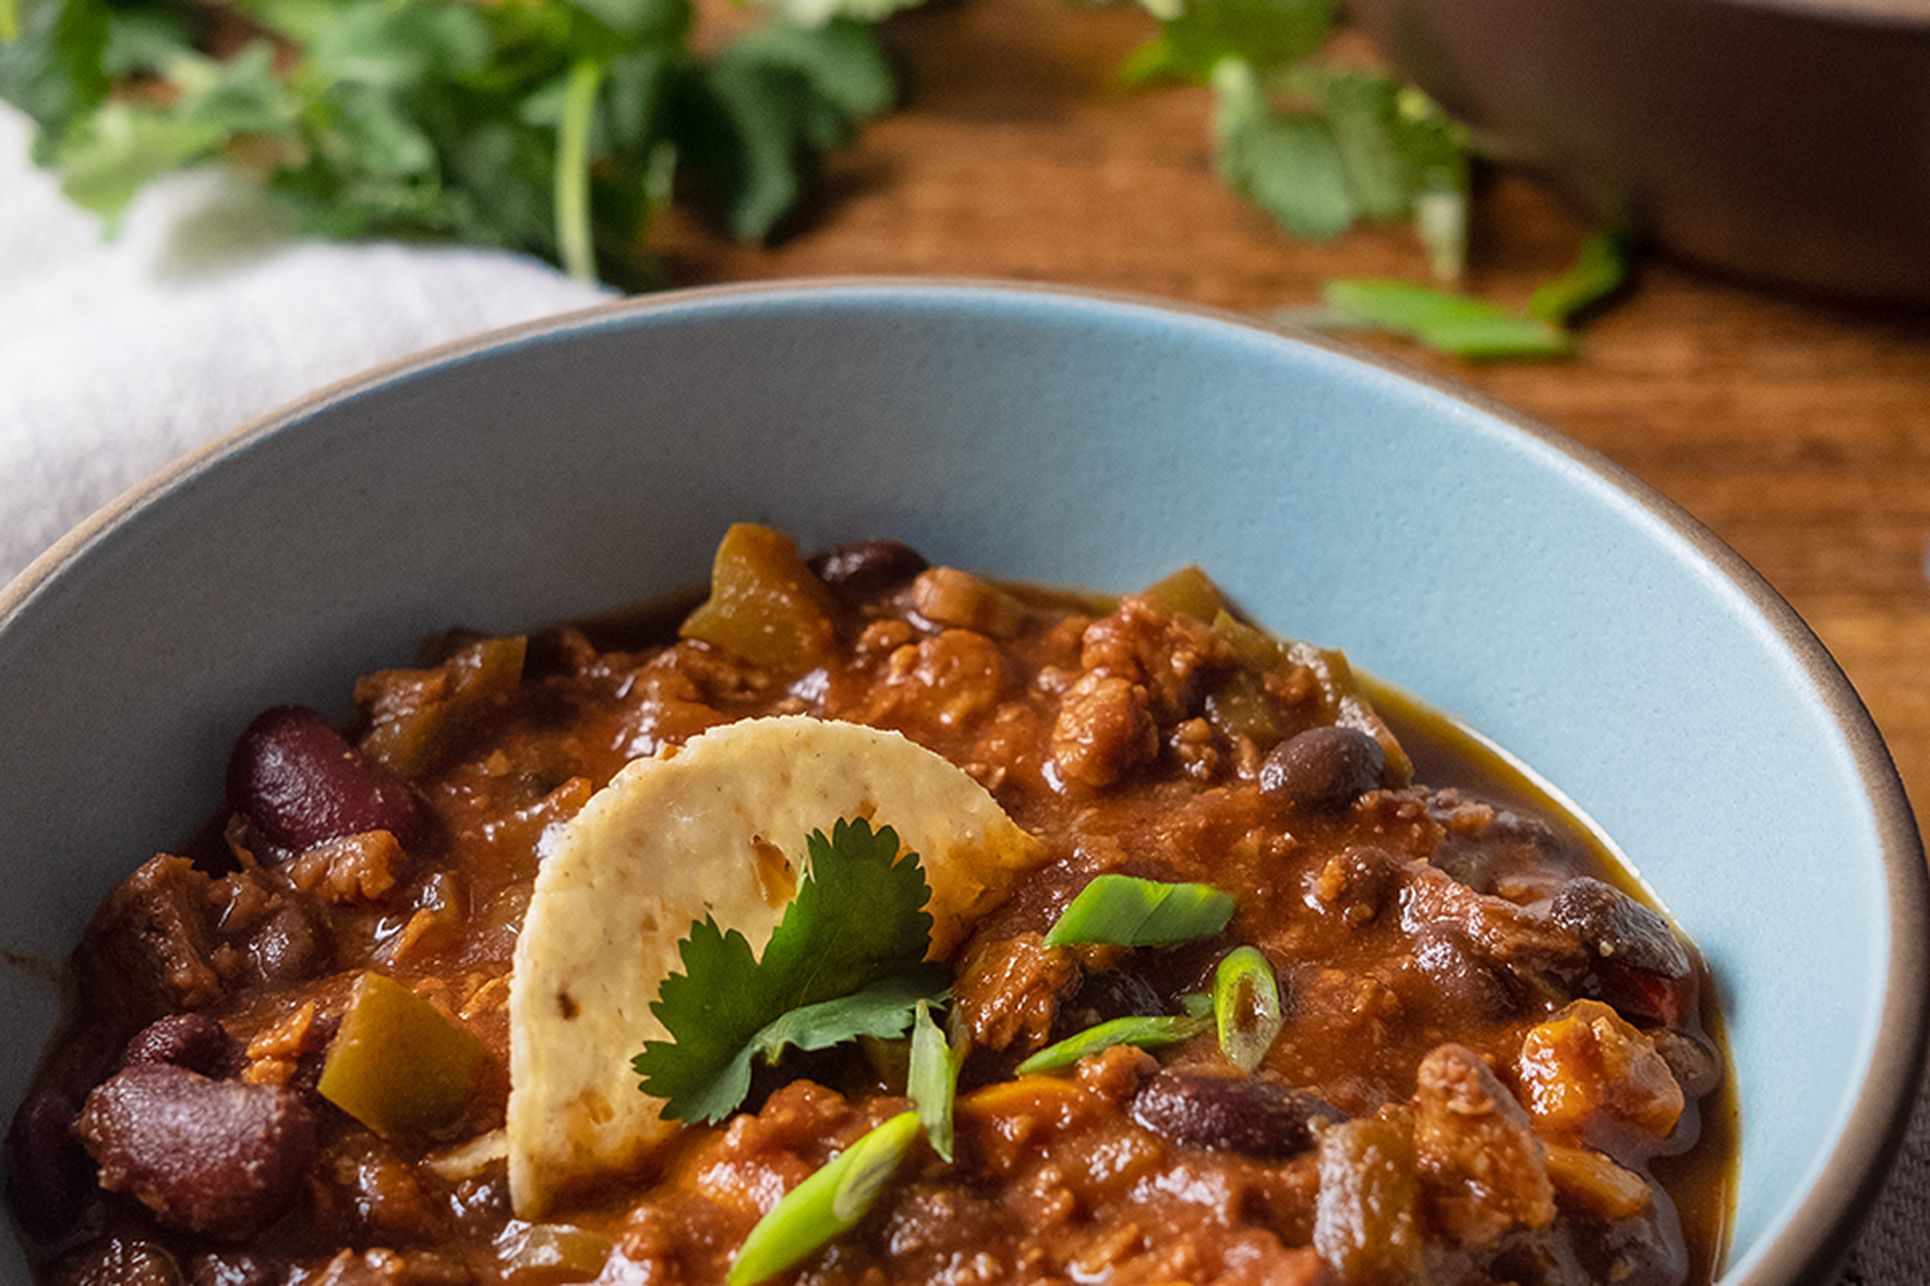 Vegetarian Chili With Beans And Veggie Crumbles Recipe On Food52